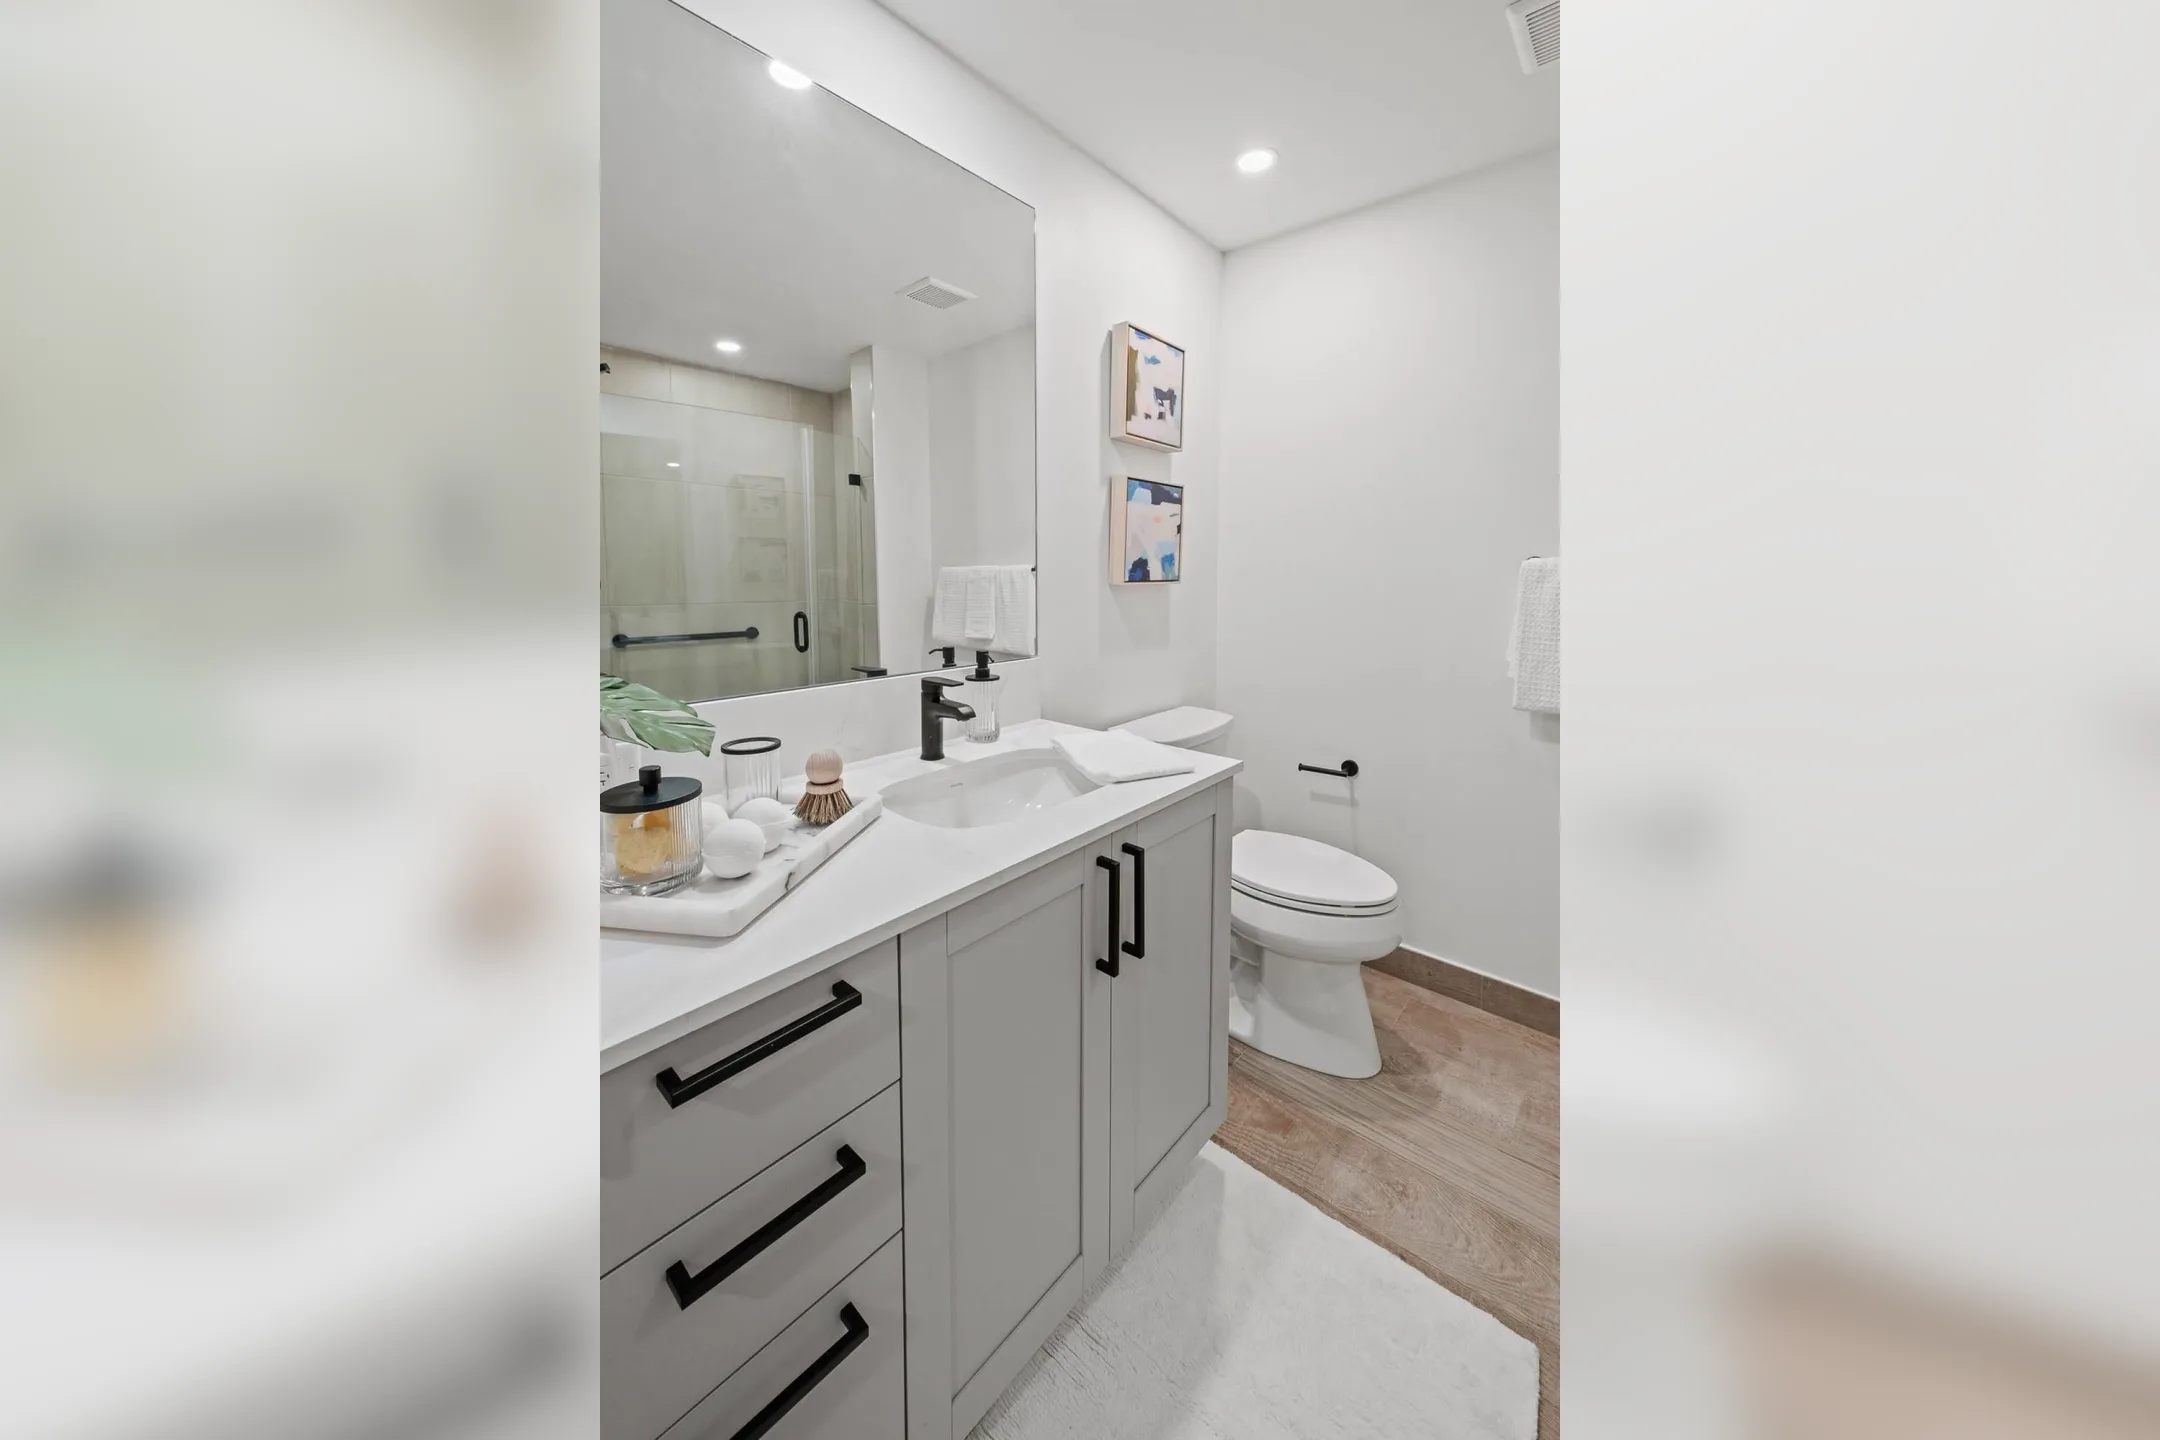 Bathroom - The Residences at Monterra Commons - 55+ Active Adult Community - Pembroke Pines, FL